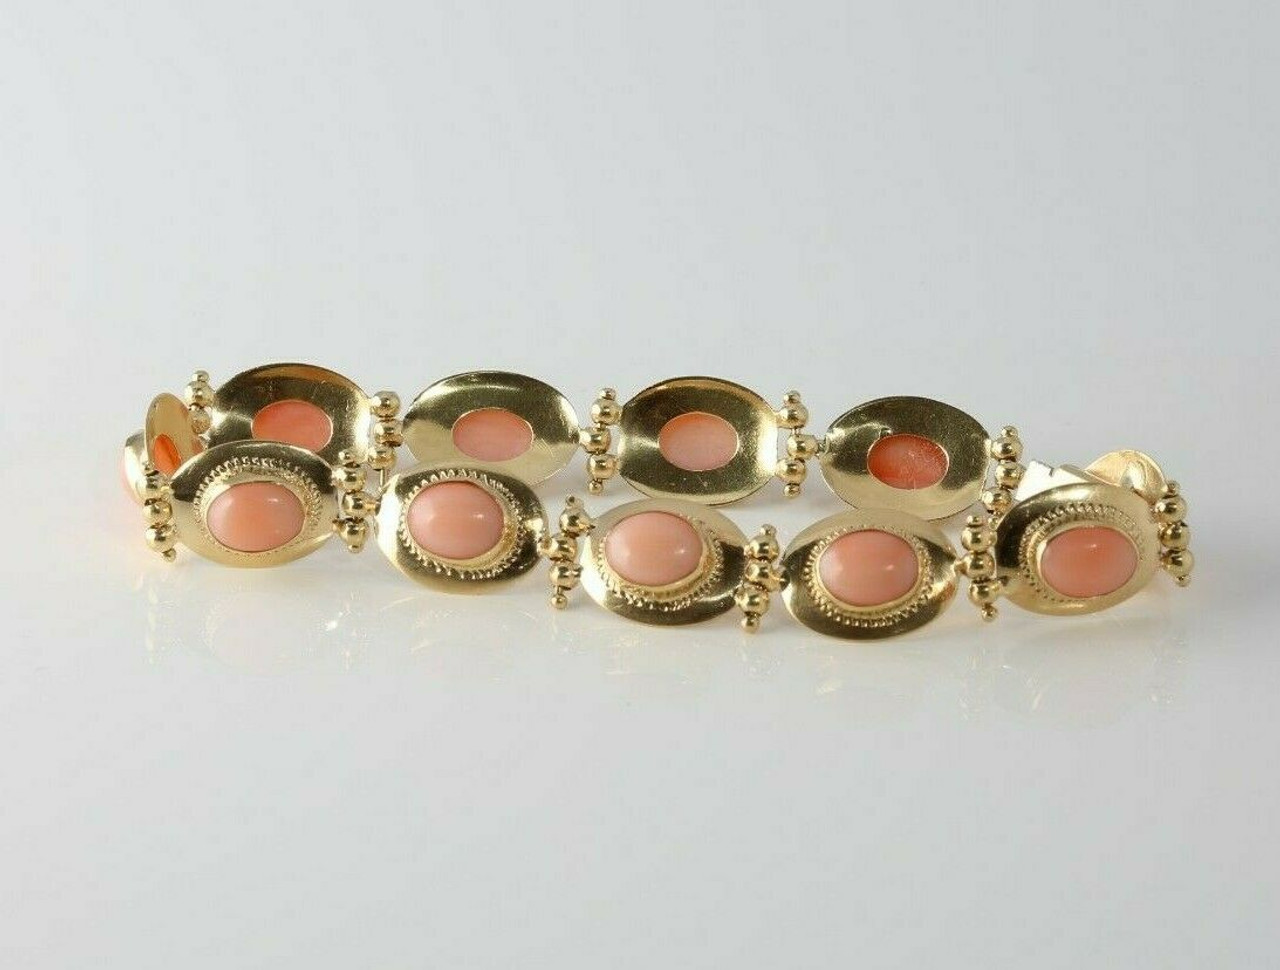 Antique Natural Mediterranean Red Coral Bracelet, Three Strands, Gold  Plated 800 Silver Clasp, 18.5 Cm 21.9 Grams - Etsy